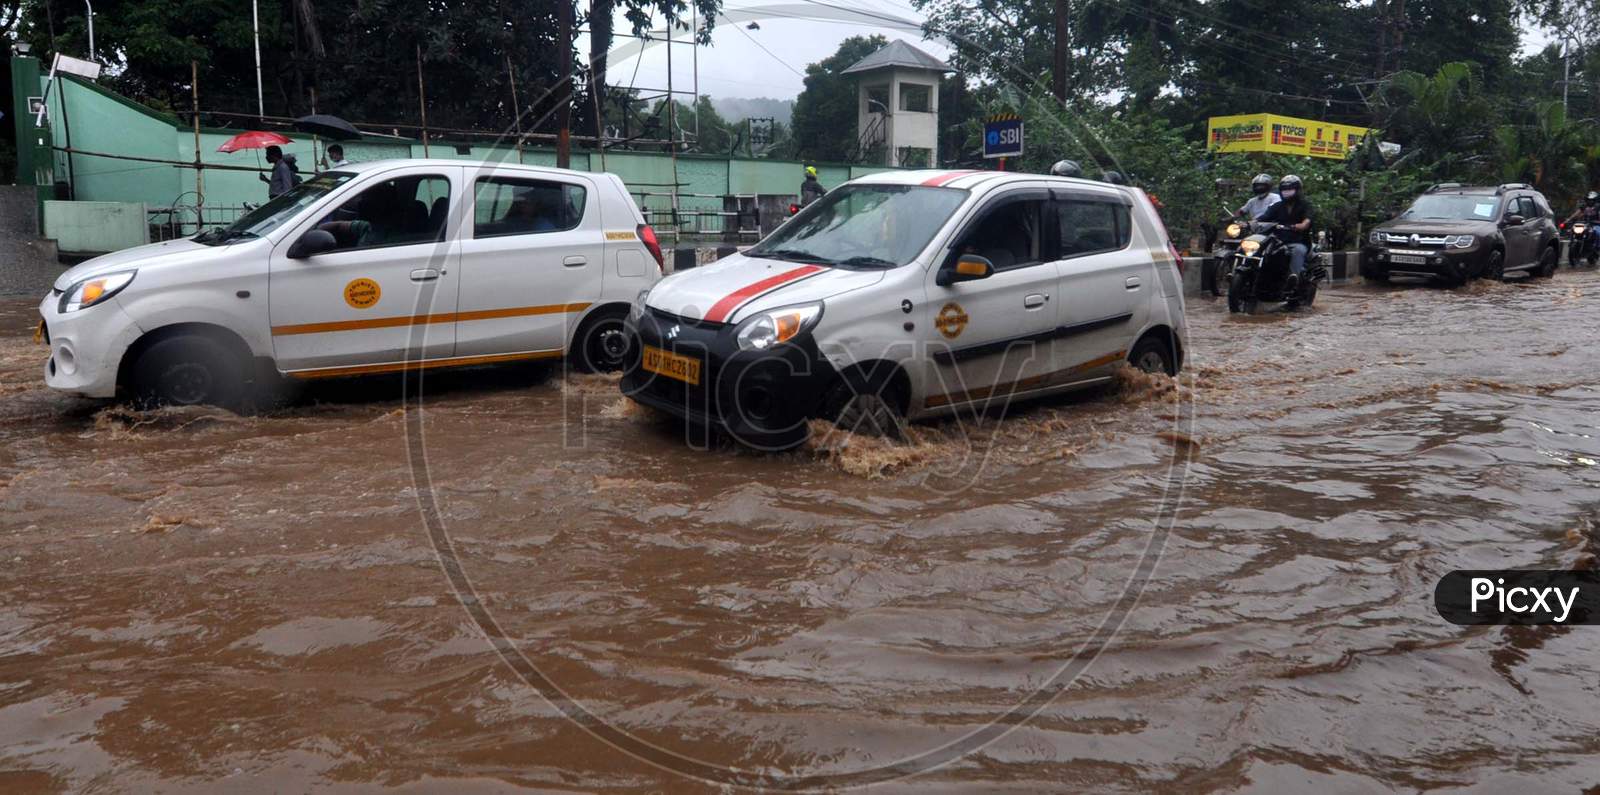 Commuters Wade Through A Waterlogged Street After Rainfall  In Guwahati On July 30, 2020.